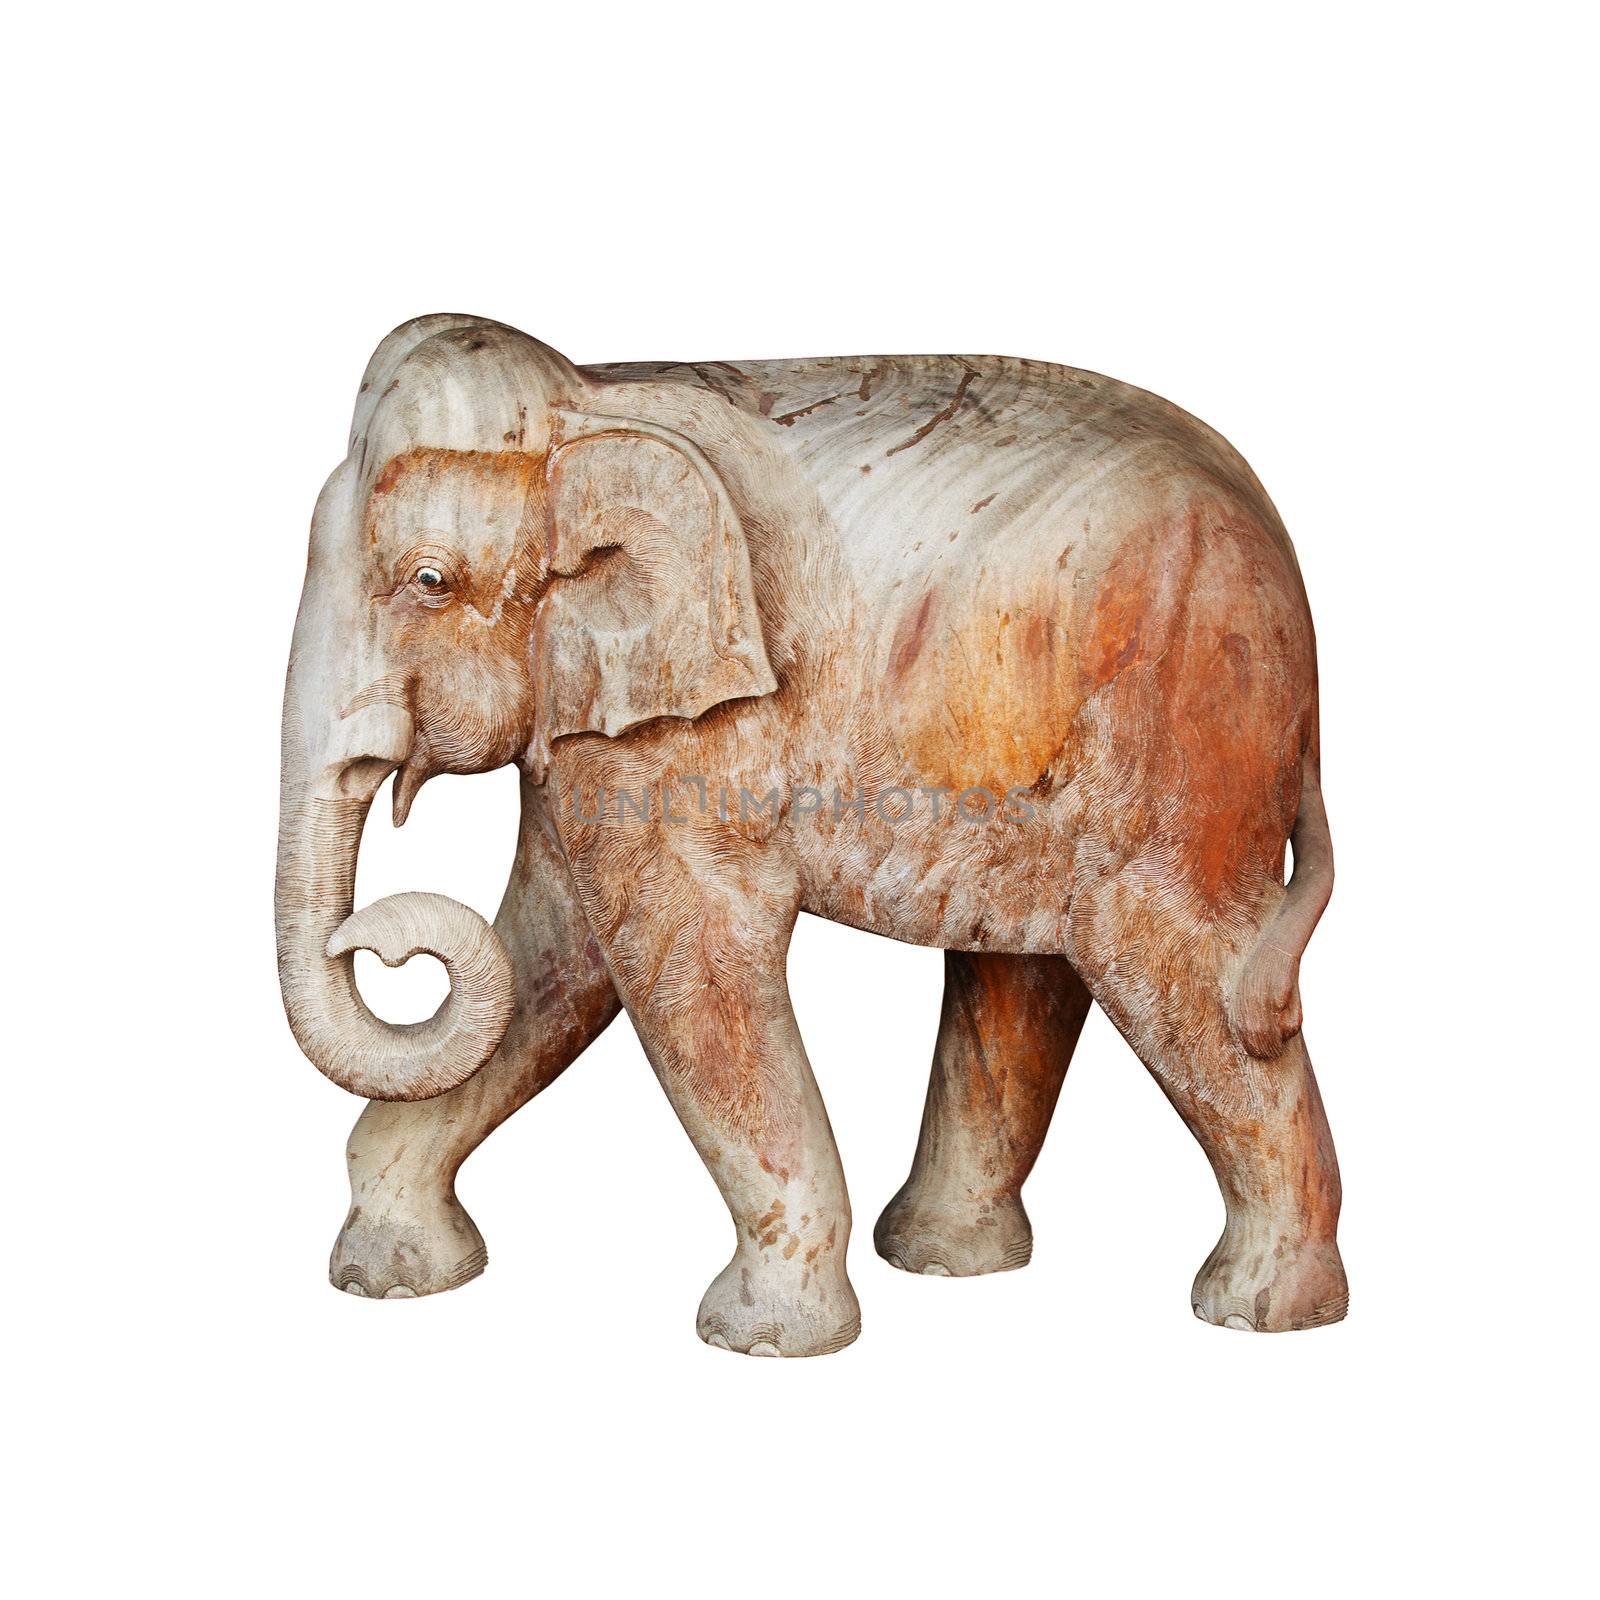 A large wooden sculpture - elephant walking on white